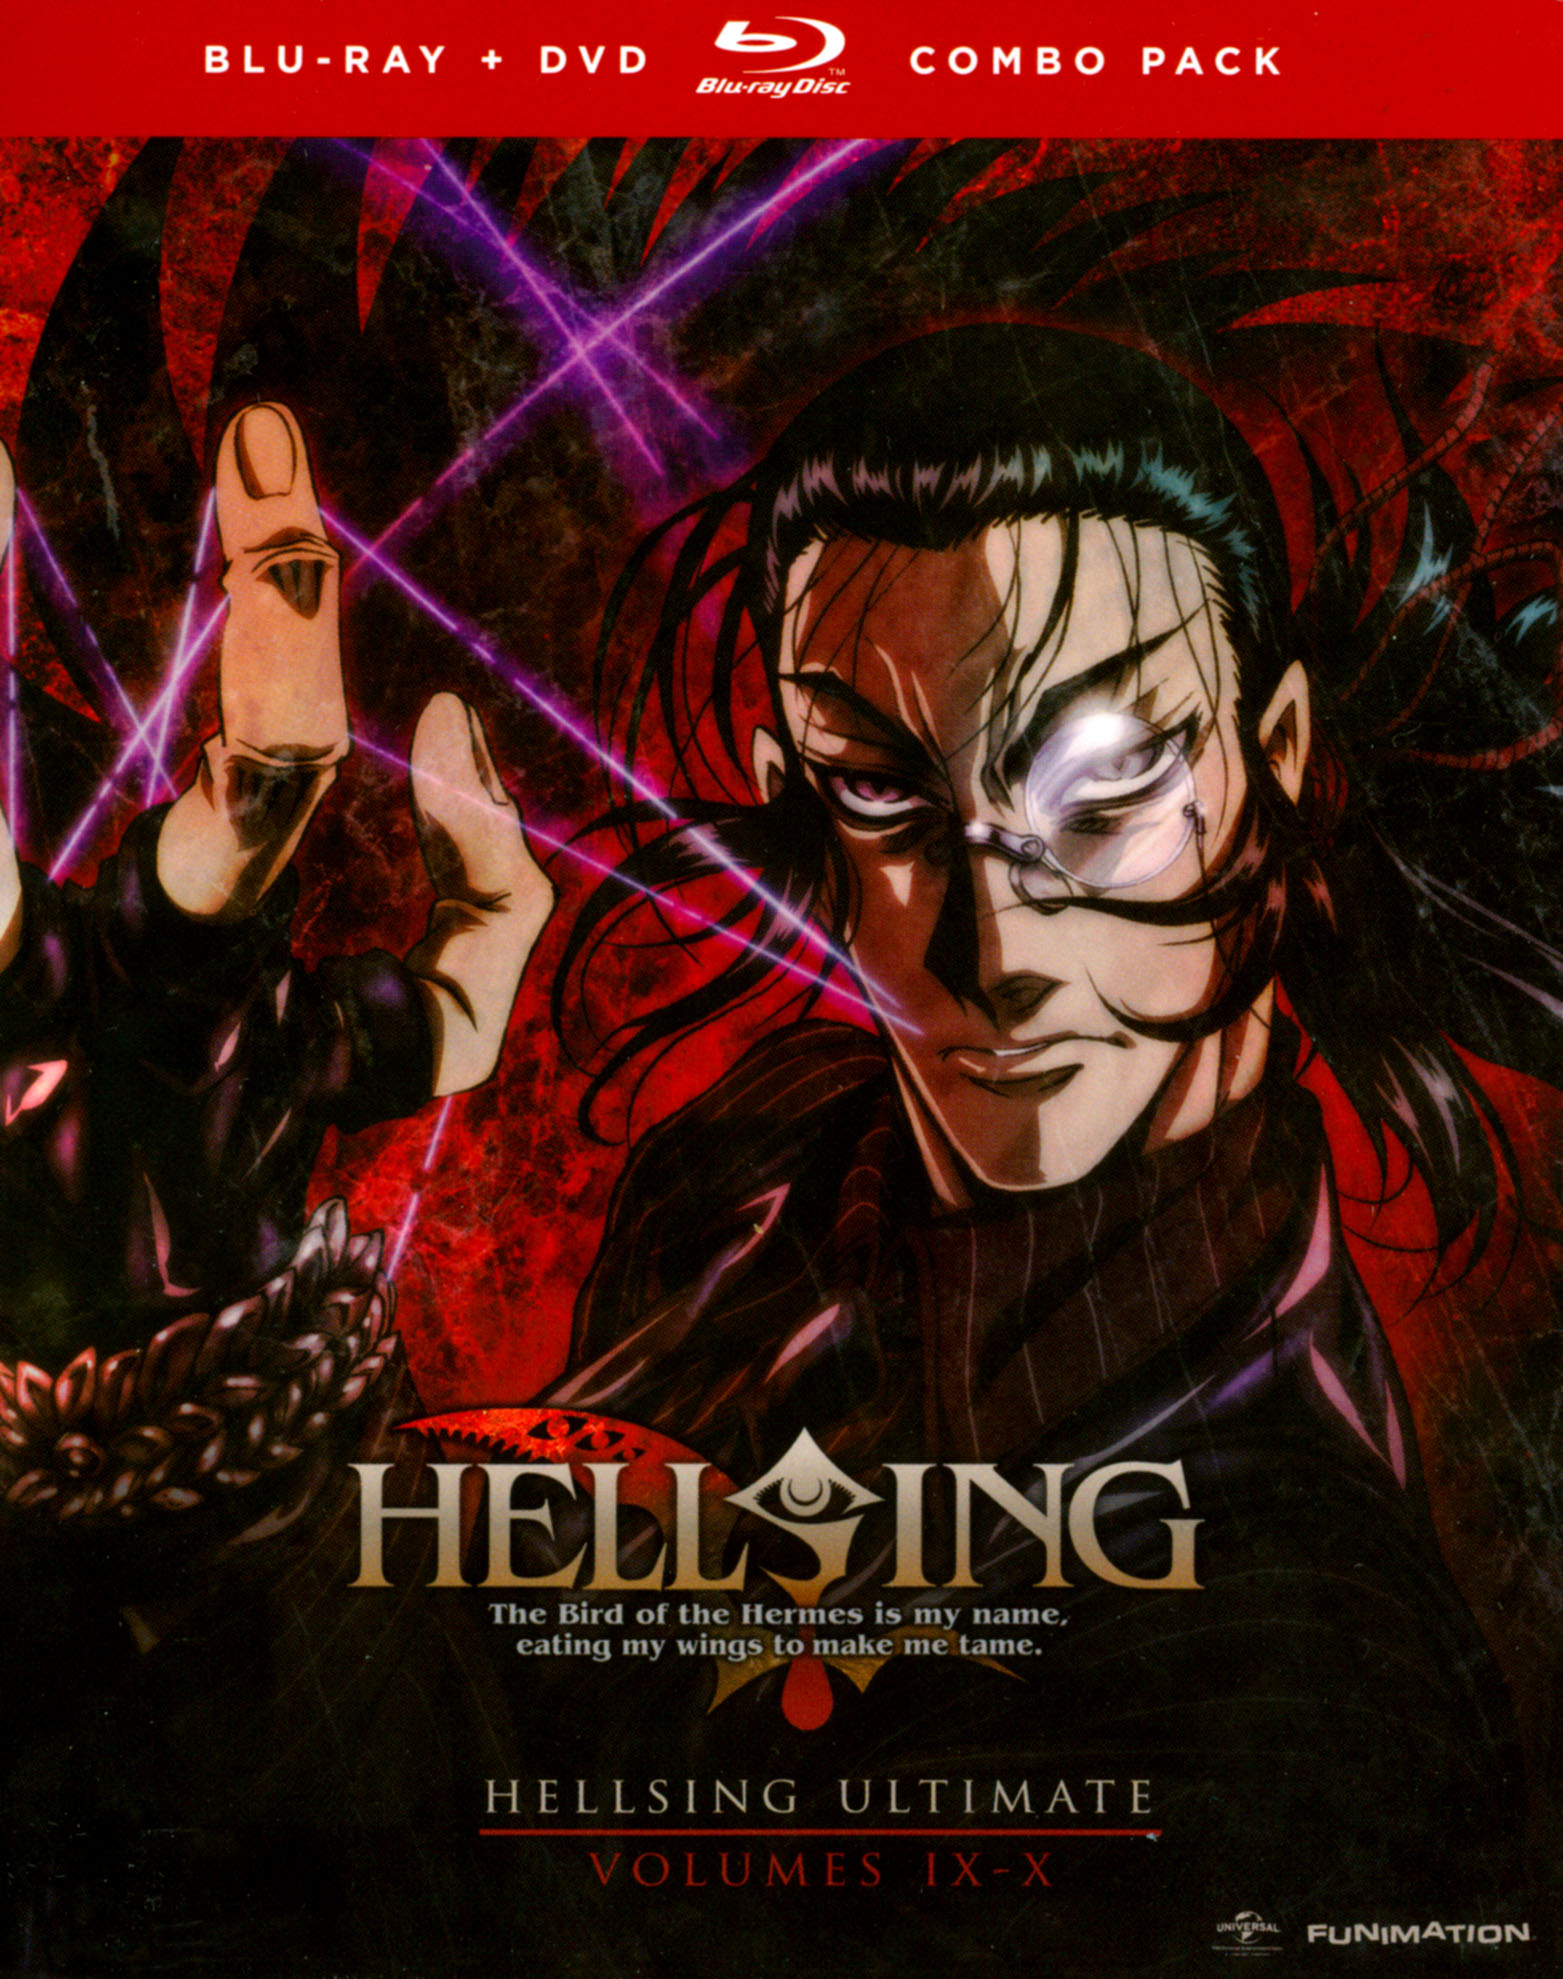 Review- Hellsing: Ultimate: About as Fun as an Anime Can Be